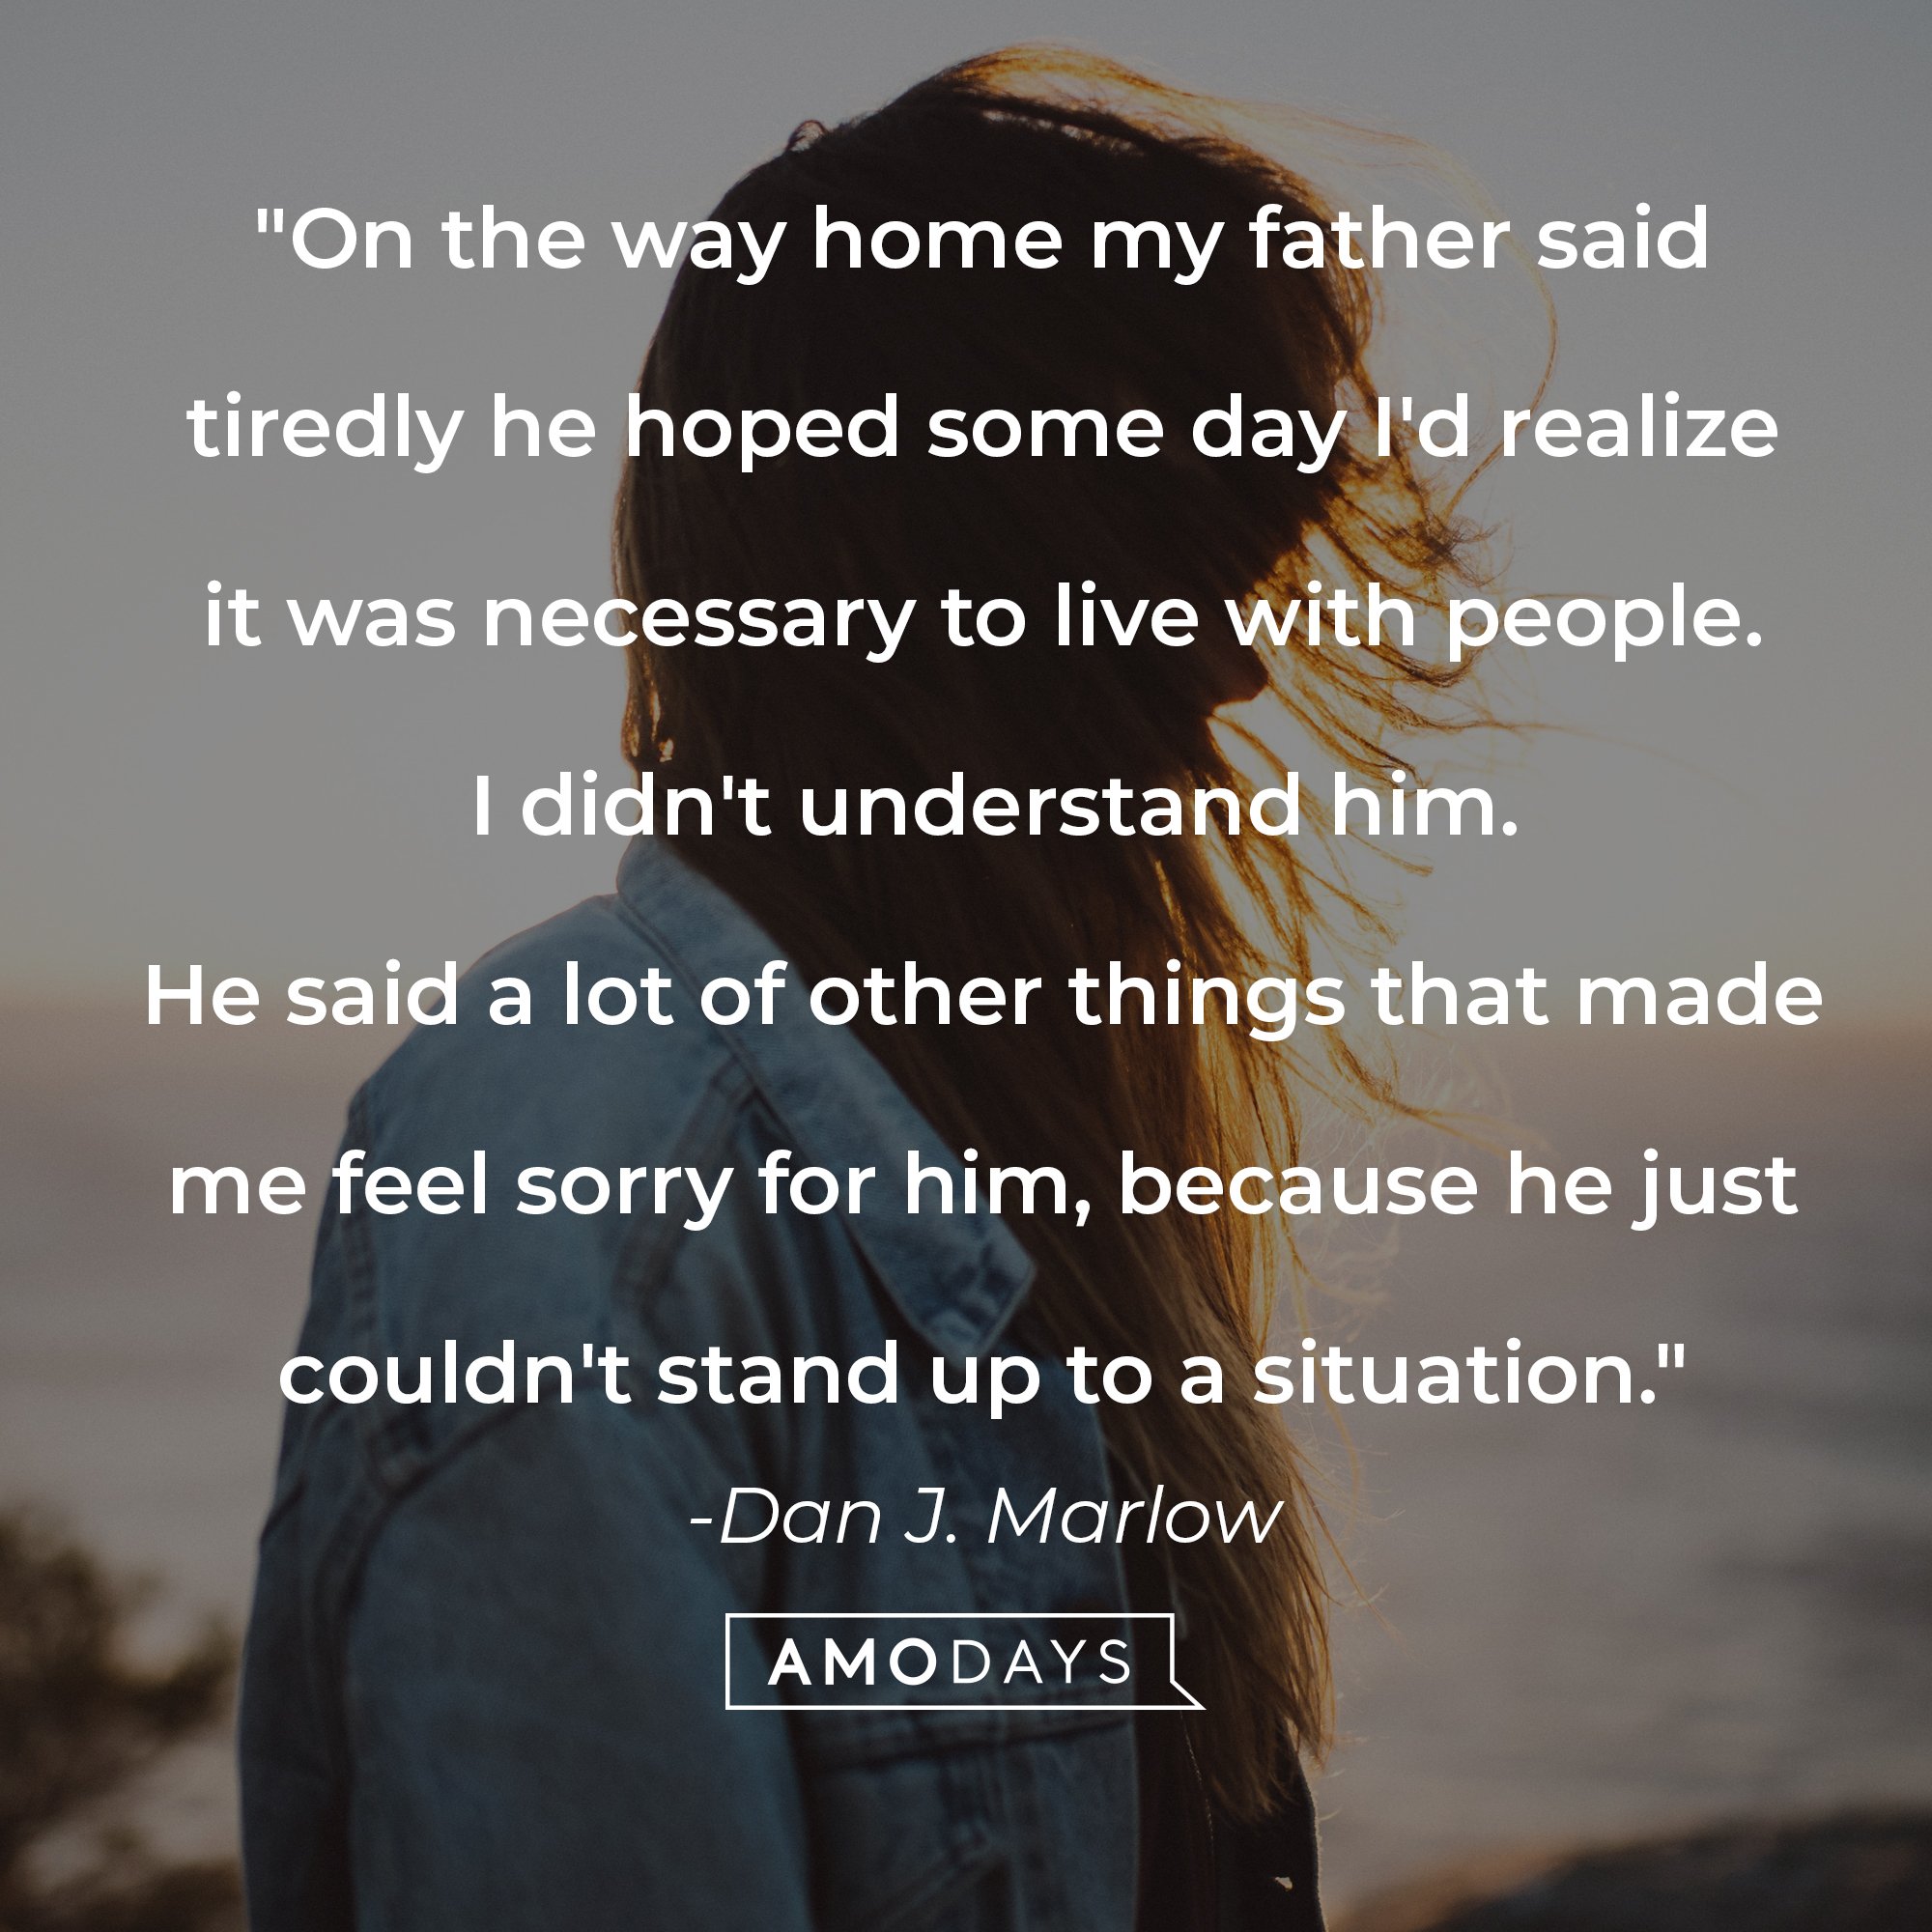 Dan J. Marlow's quote: "On the way home my father said tiredly he hoped some day I'd realize it was necessary to live with people. I didn't understand him. He said a lot of other things that made me feel sorry for him, because he just couldn't stand up to a situation." | Image: AmoDays